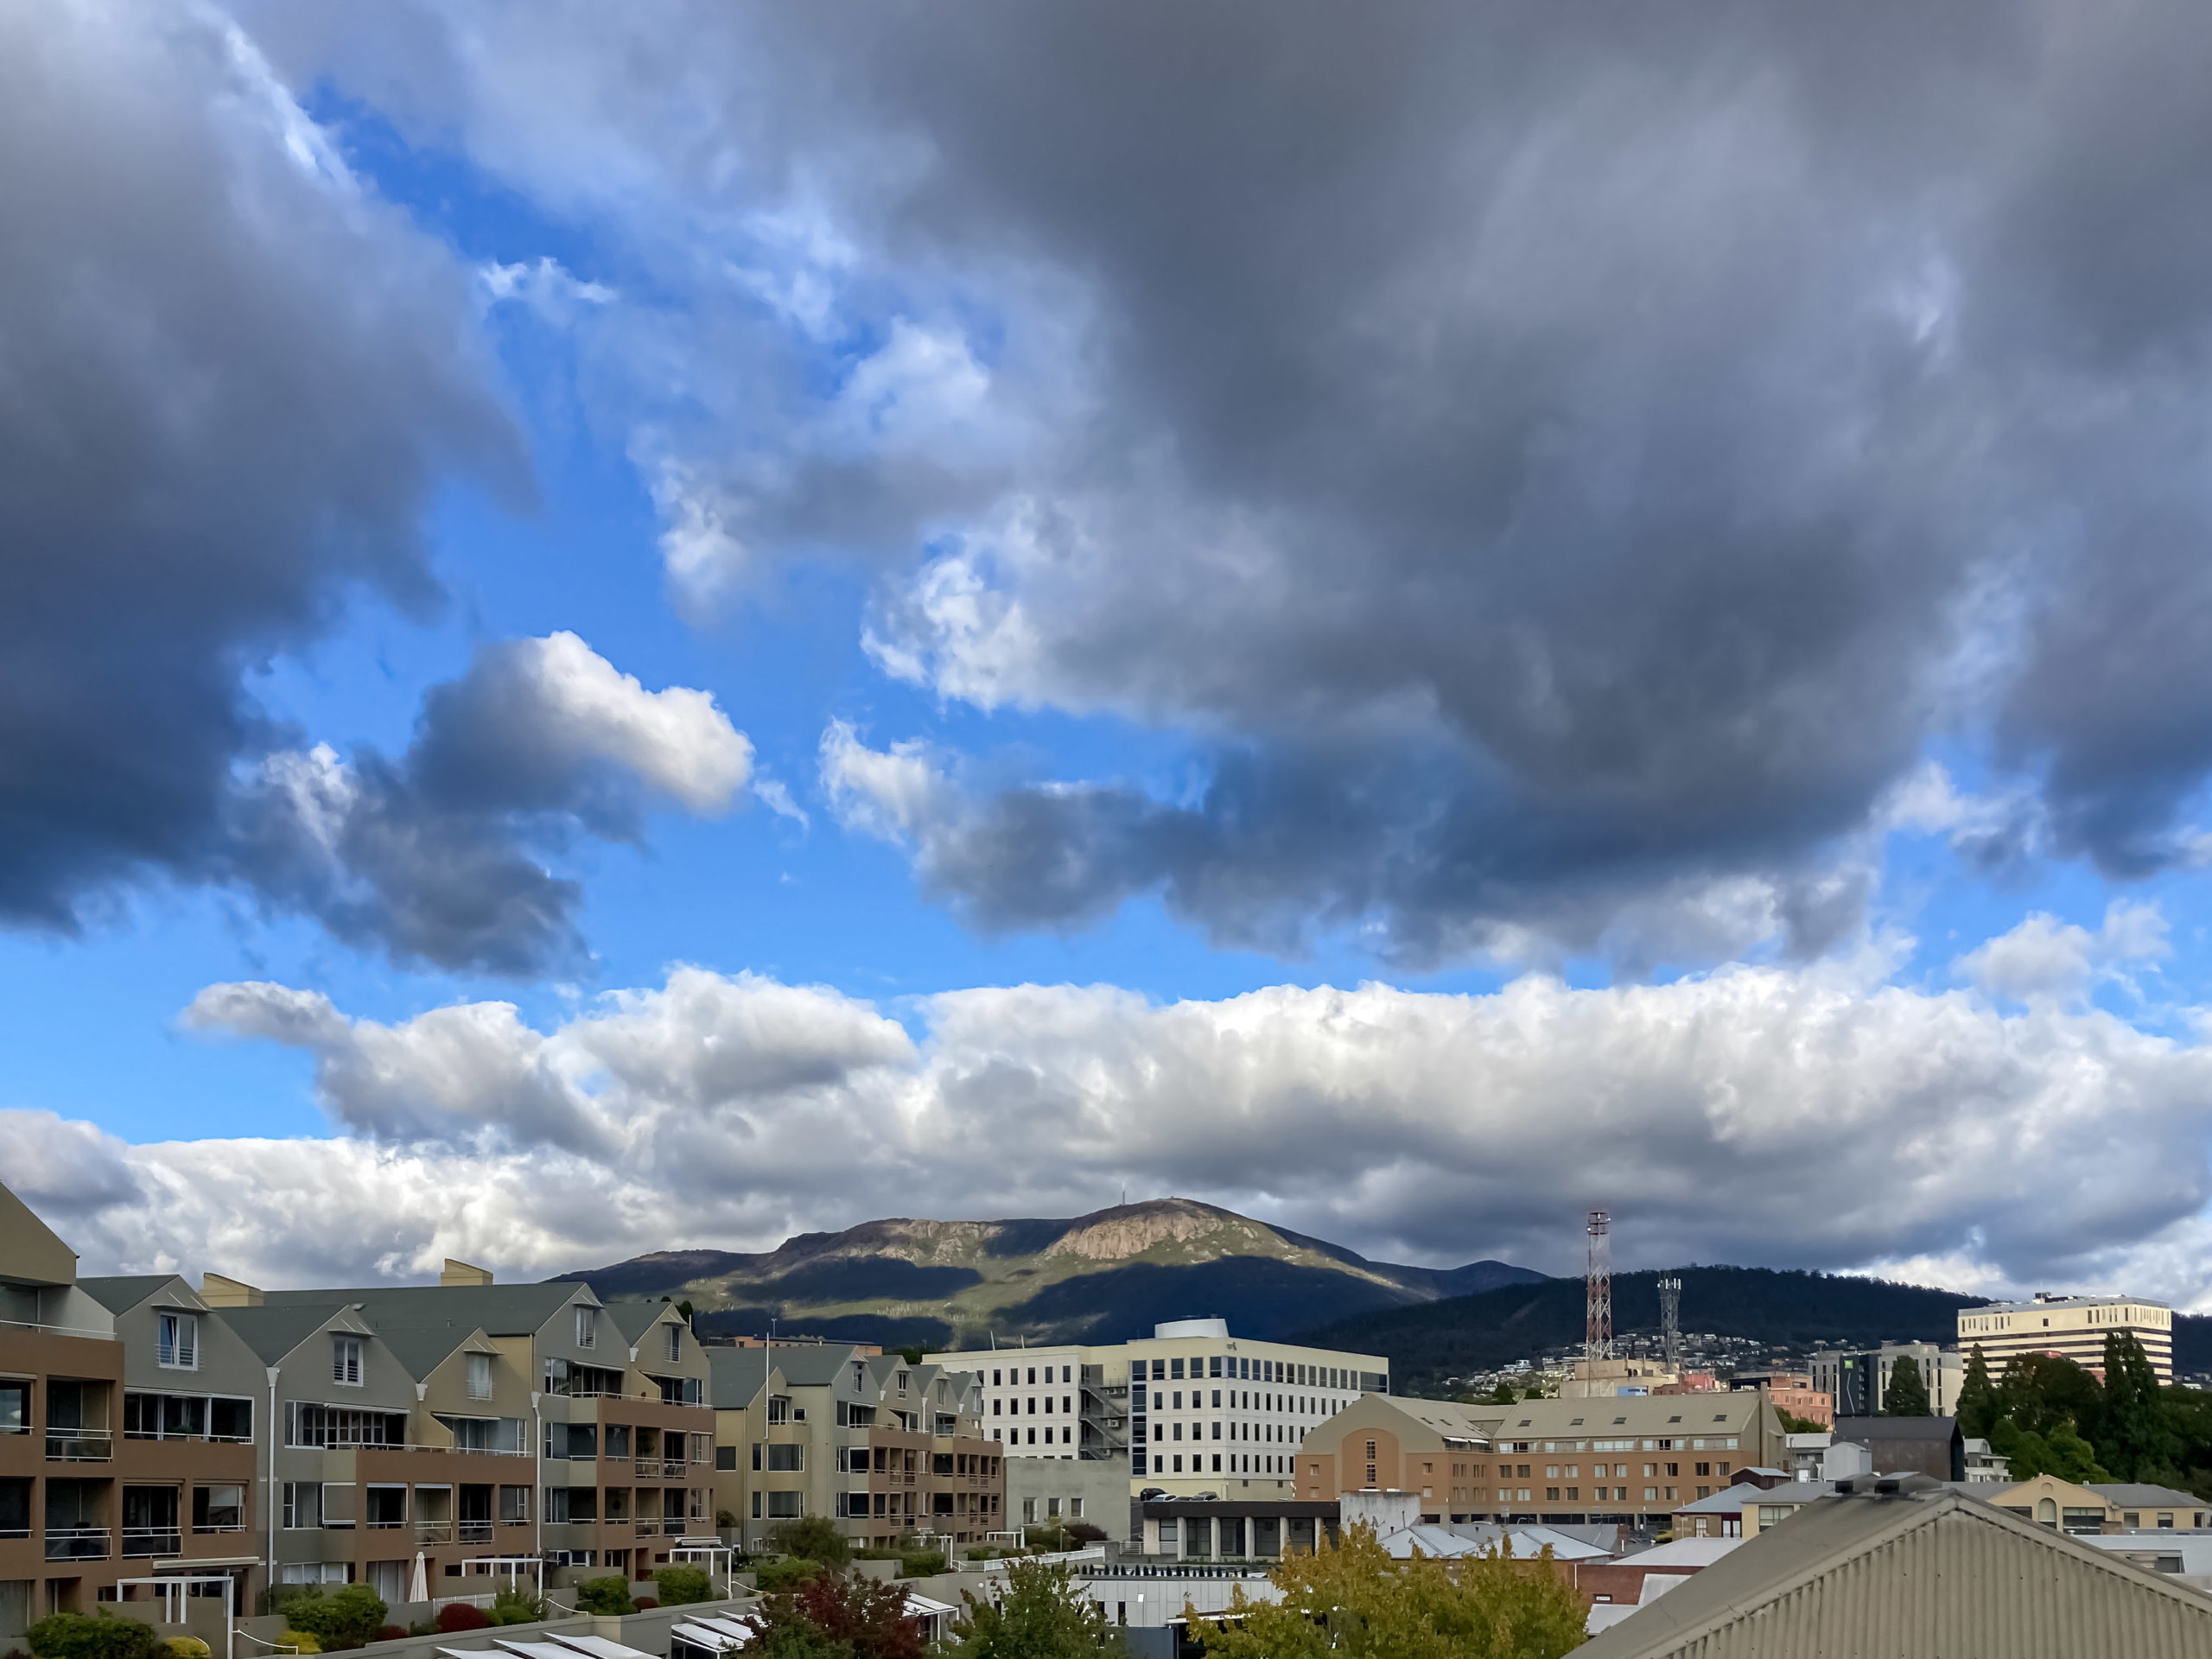 A blue, cloudy morning sky with a mountain in the background and buildings in the foreground